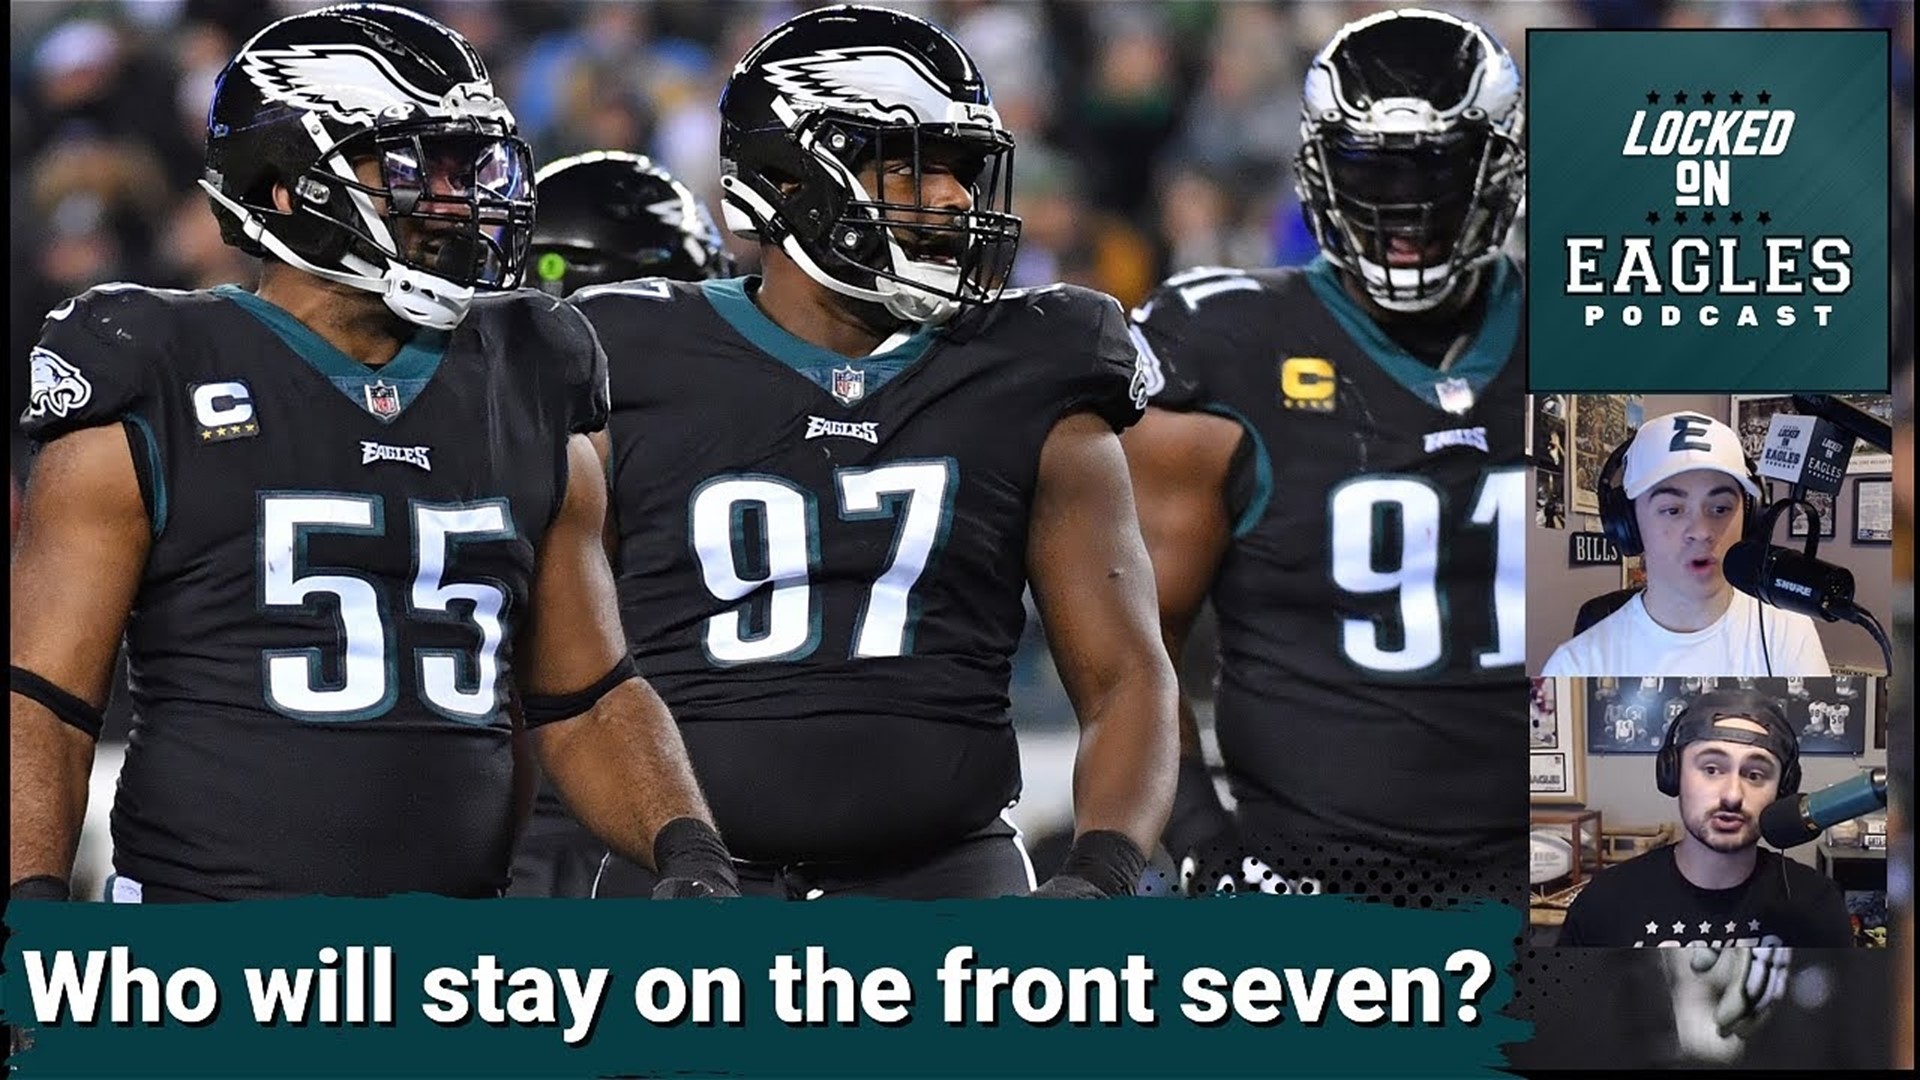 The Philadelphia Eagles have five free agents on the defensive line including Javon Hargrave, Fletcher Cox, and Brandon Graham. Can they afford to keep any of them?